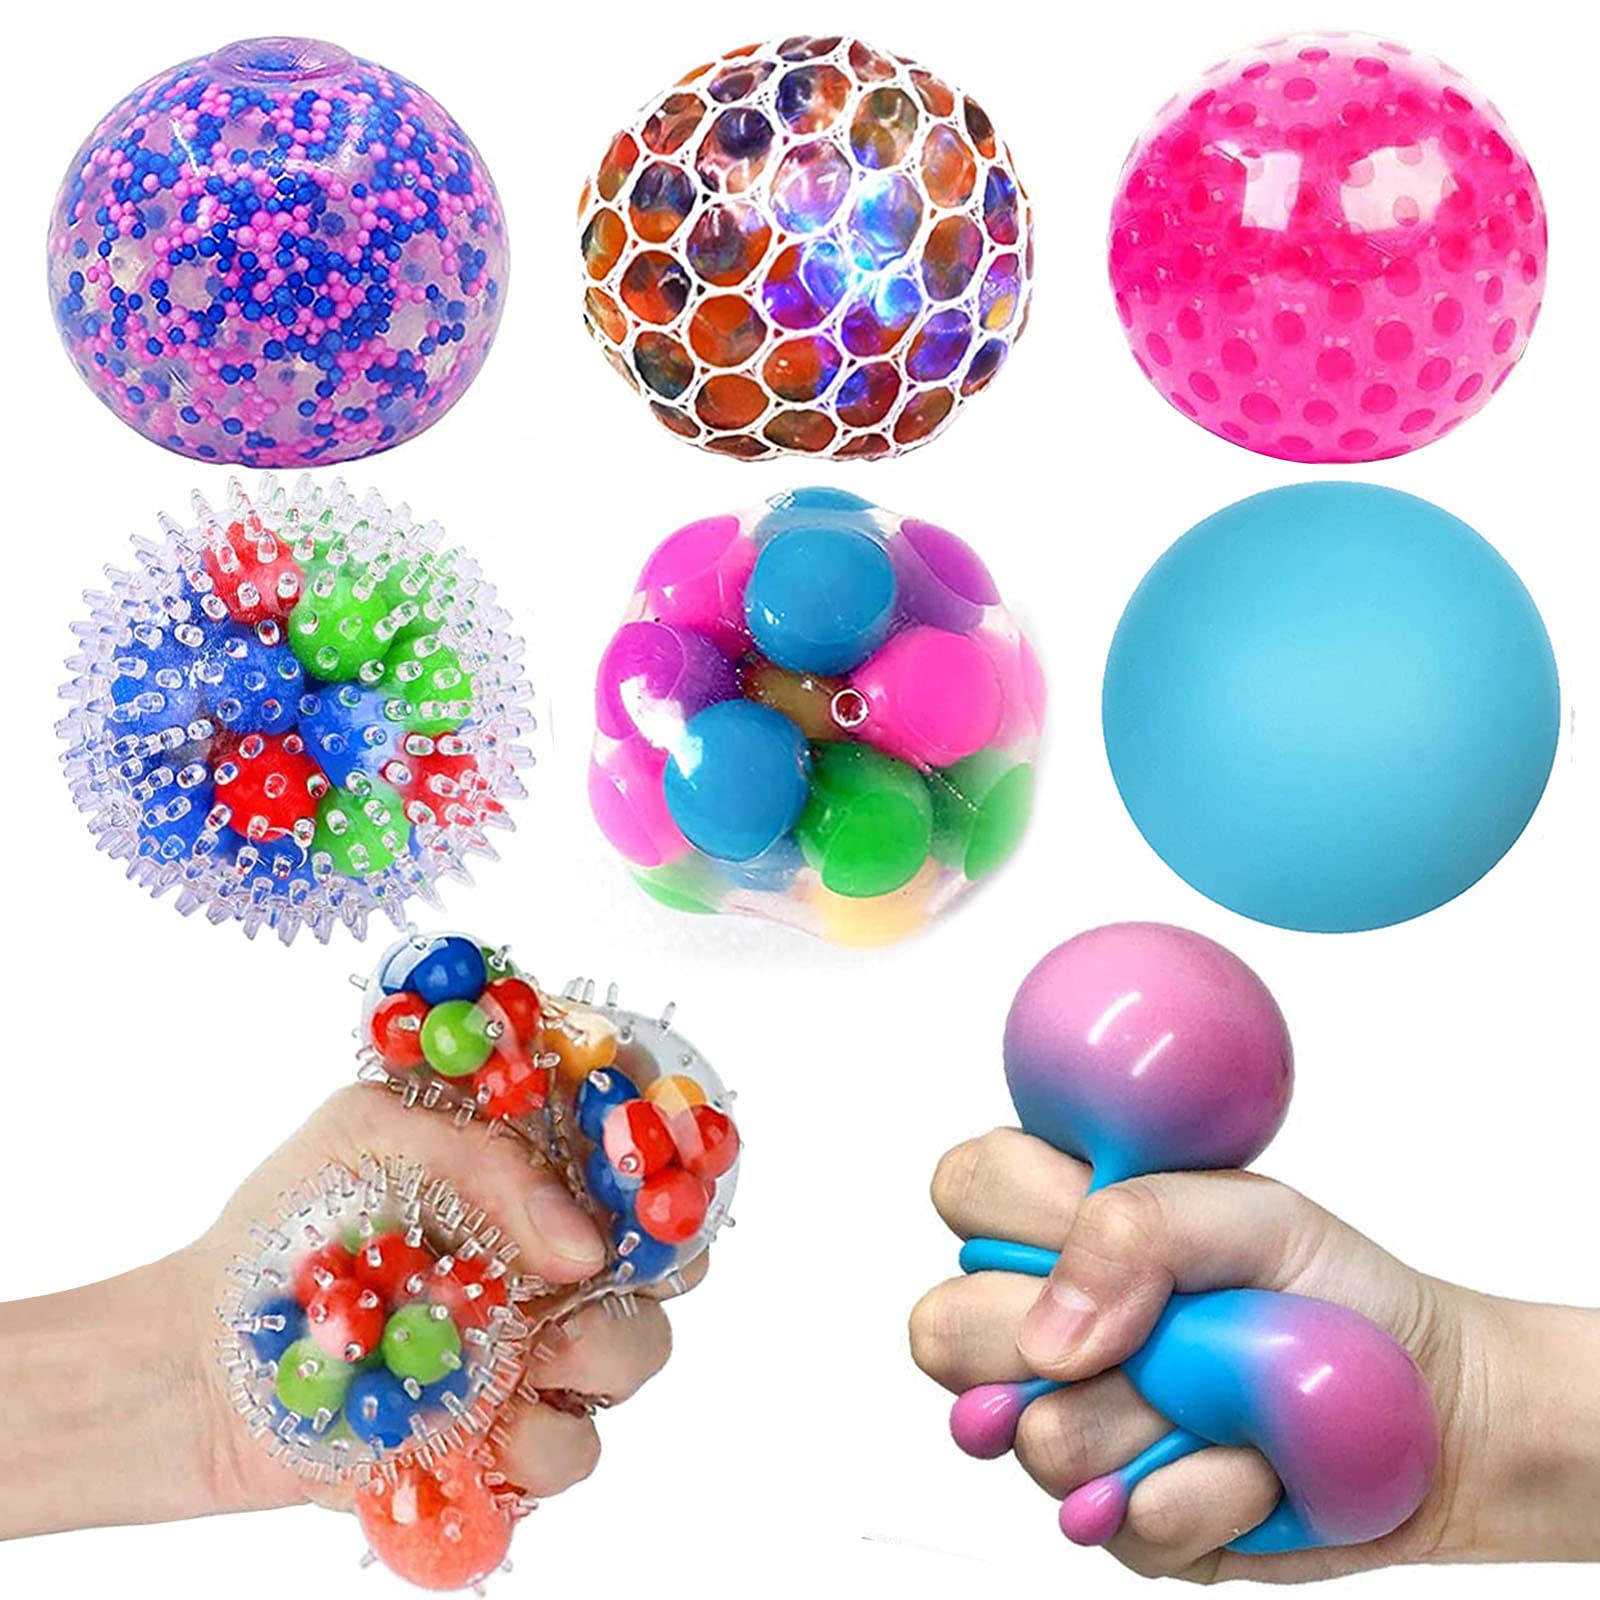 HIETIRA Squishy Stress Balls for Kids and Adults - 6 Balls Water Bead Stress Balls Needohball DNA Balls Sensory Ball Squeeze Ball Fidget Toys Set for Anxiety Autism ADHD and More